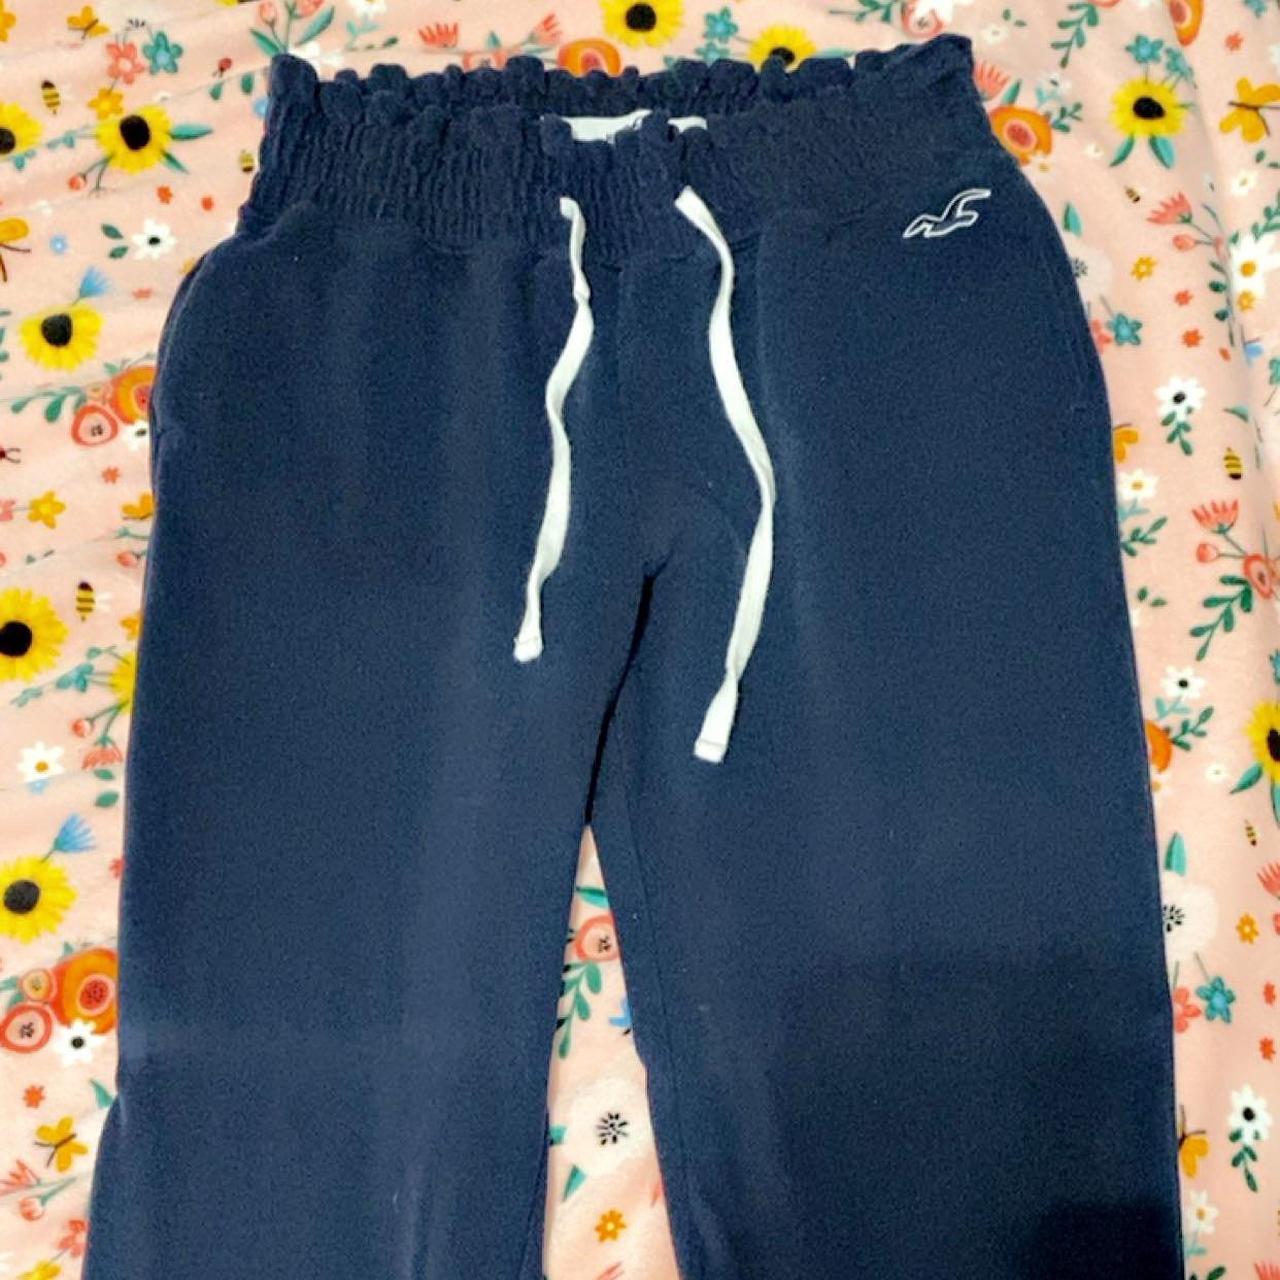 blue Hollister sweatpants! 💙 in very good condition - Depop